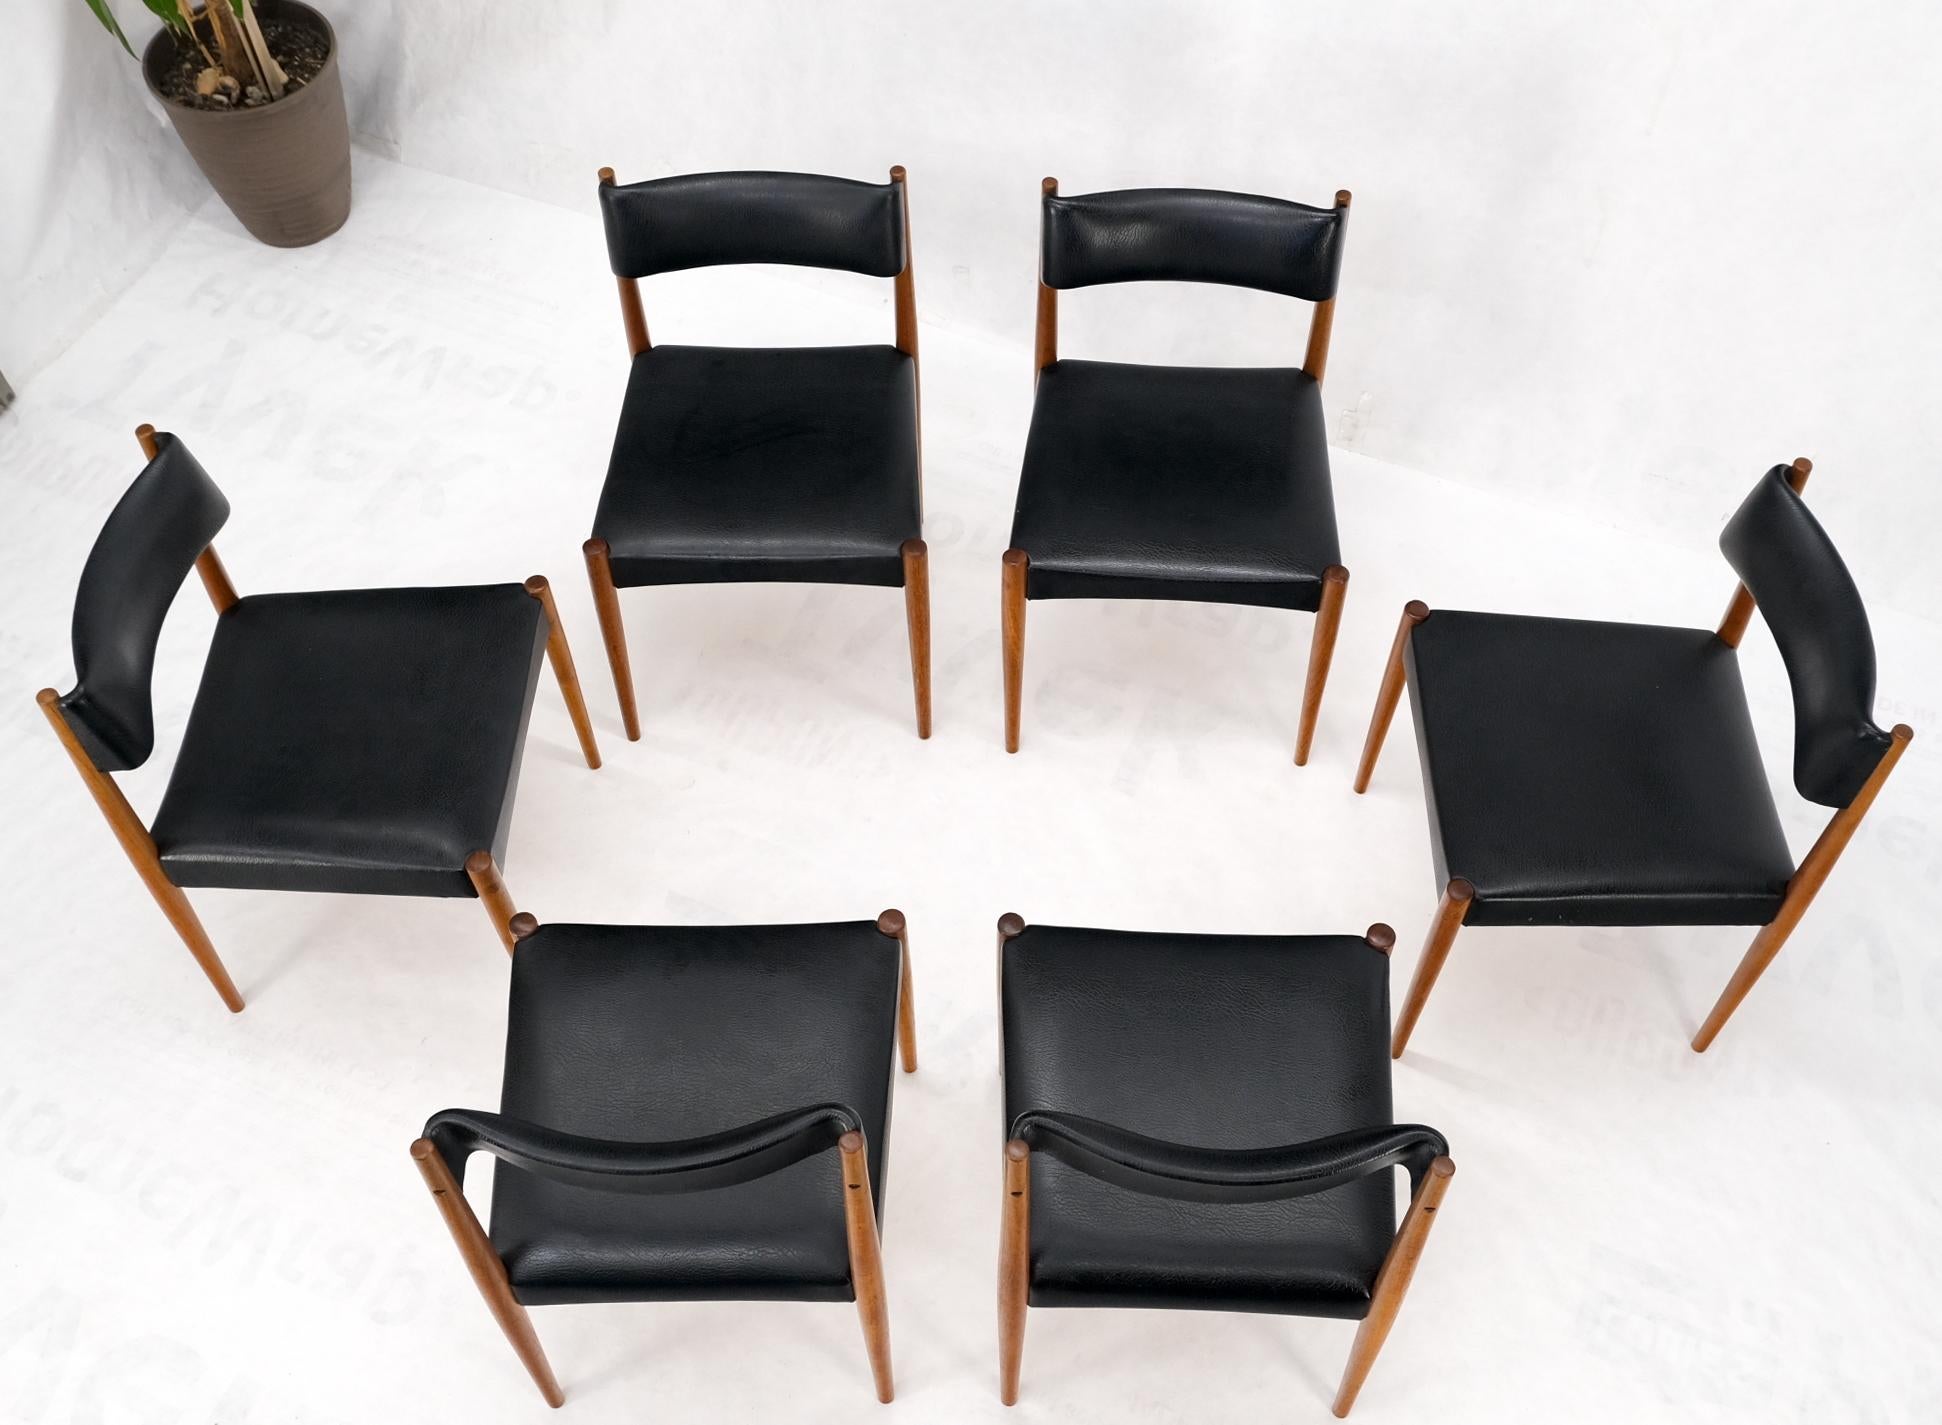 Mid-Century Modern Set of 6 Danish Teak Mid Century Modern Dining Chairs in Black Upholstery For Sale